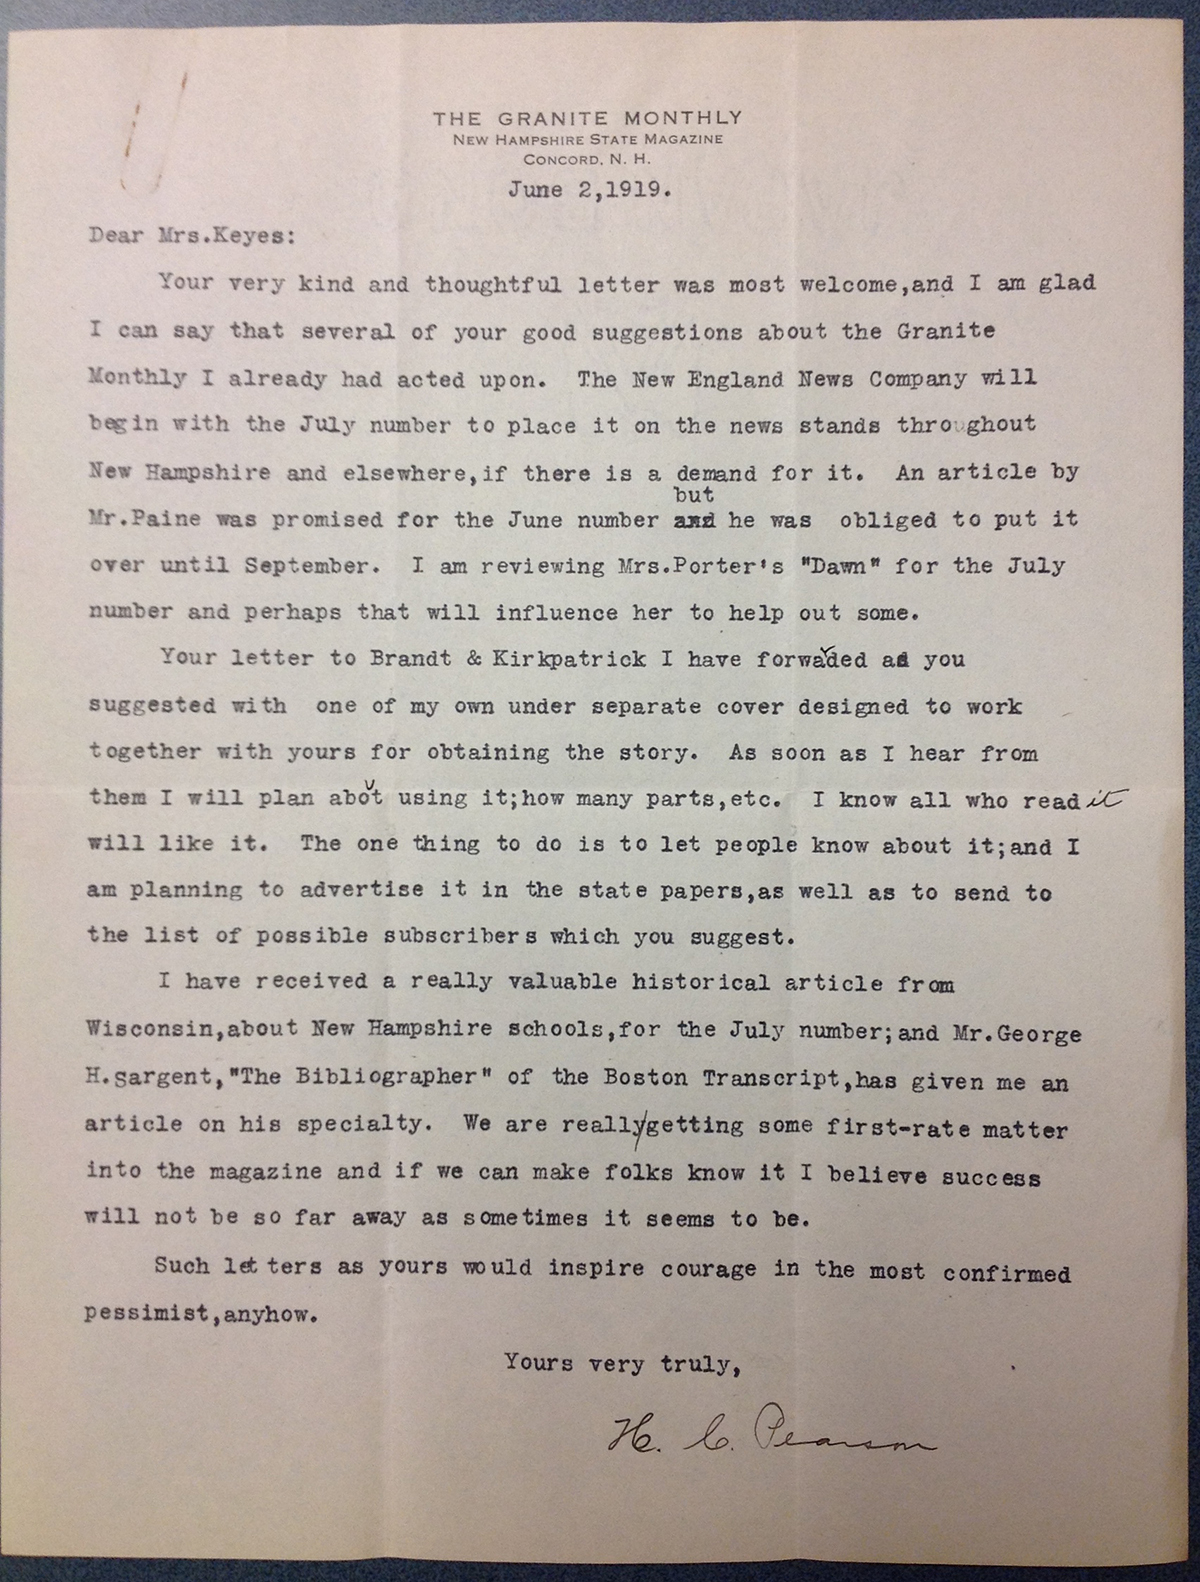 H.C. Pearson to FPK<br />
Letter, 1919 June 02